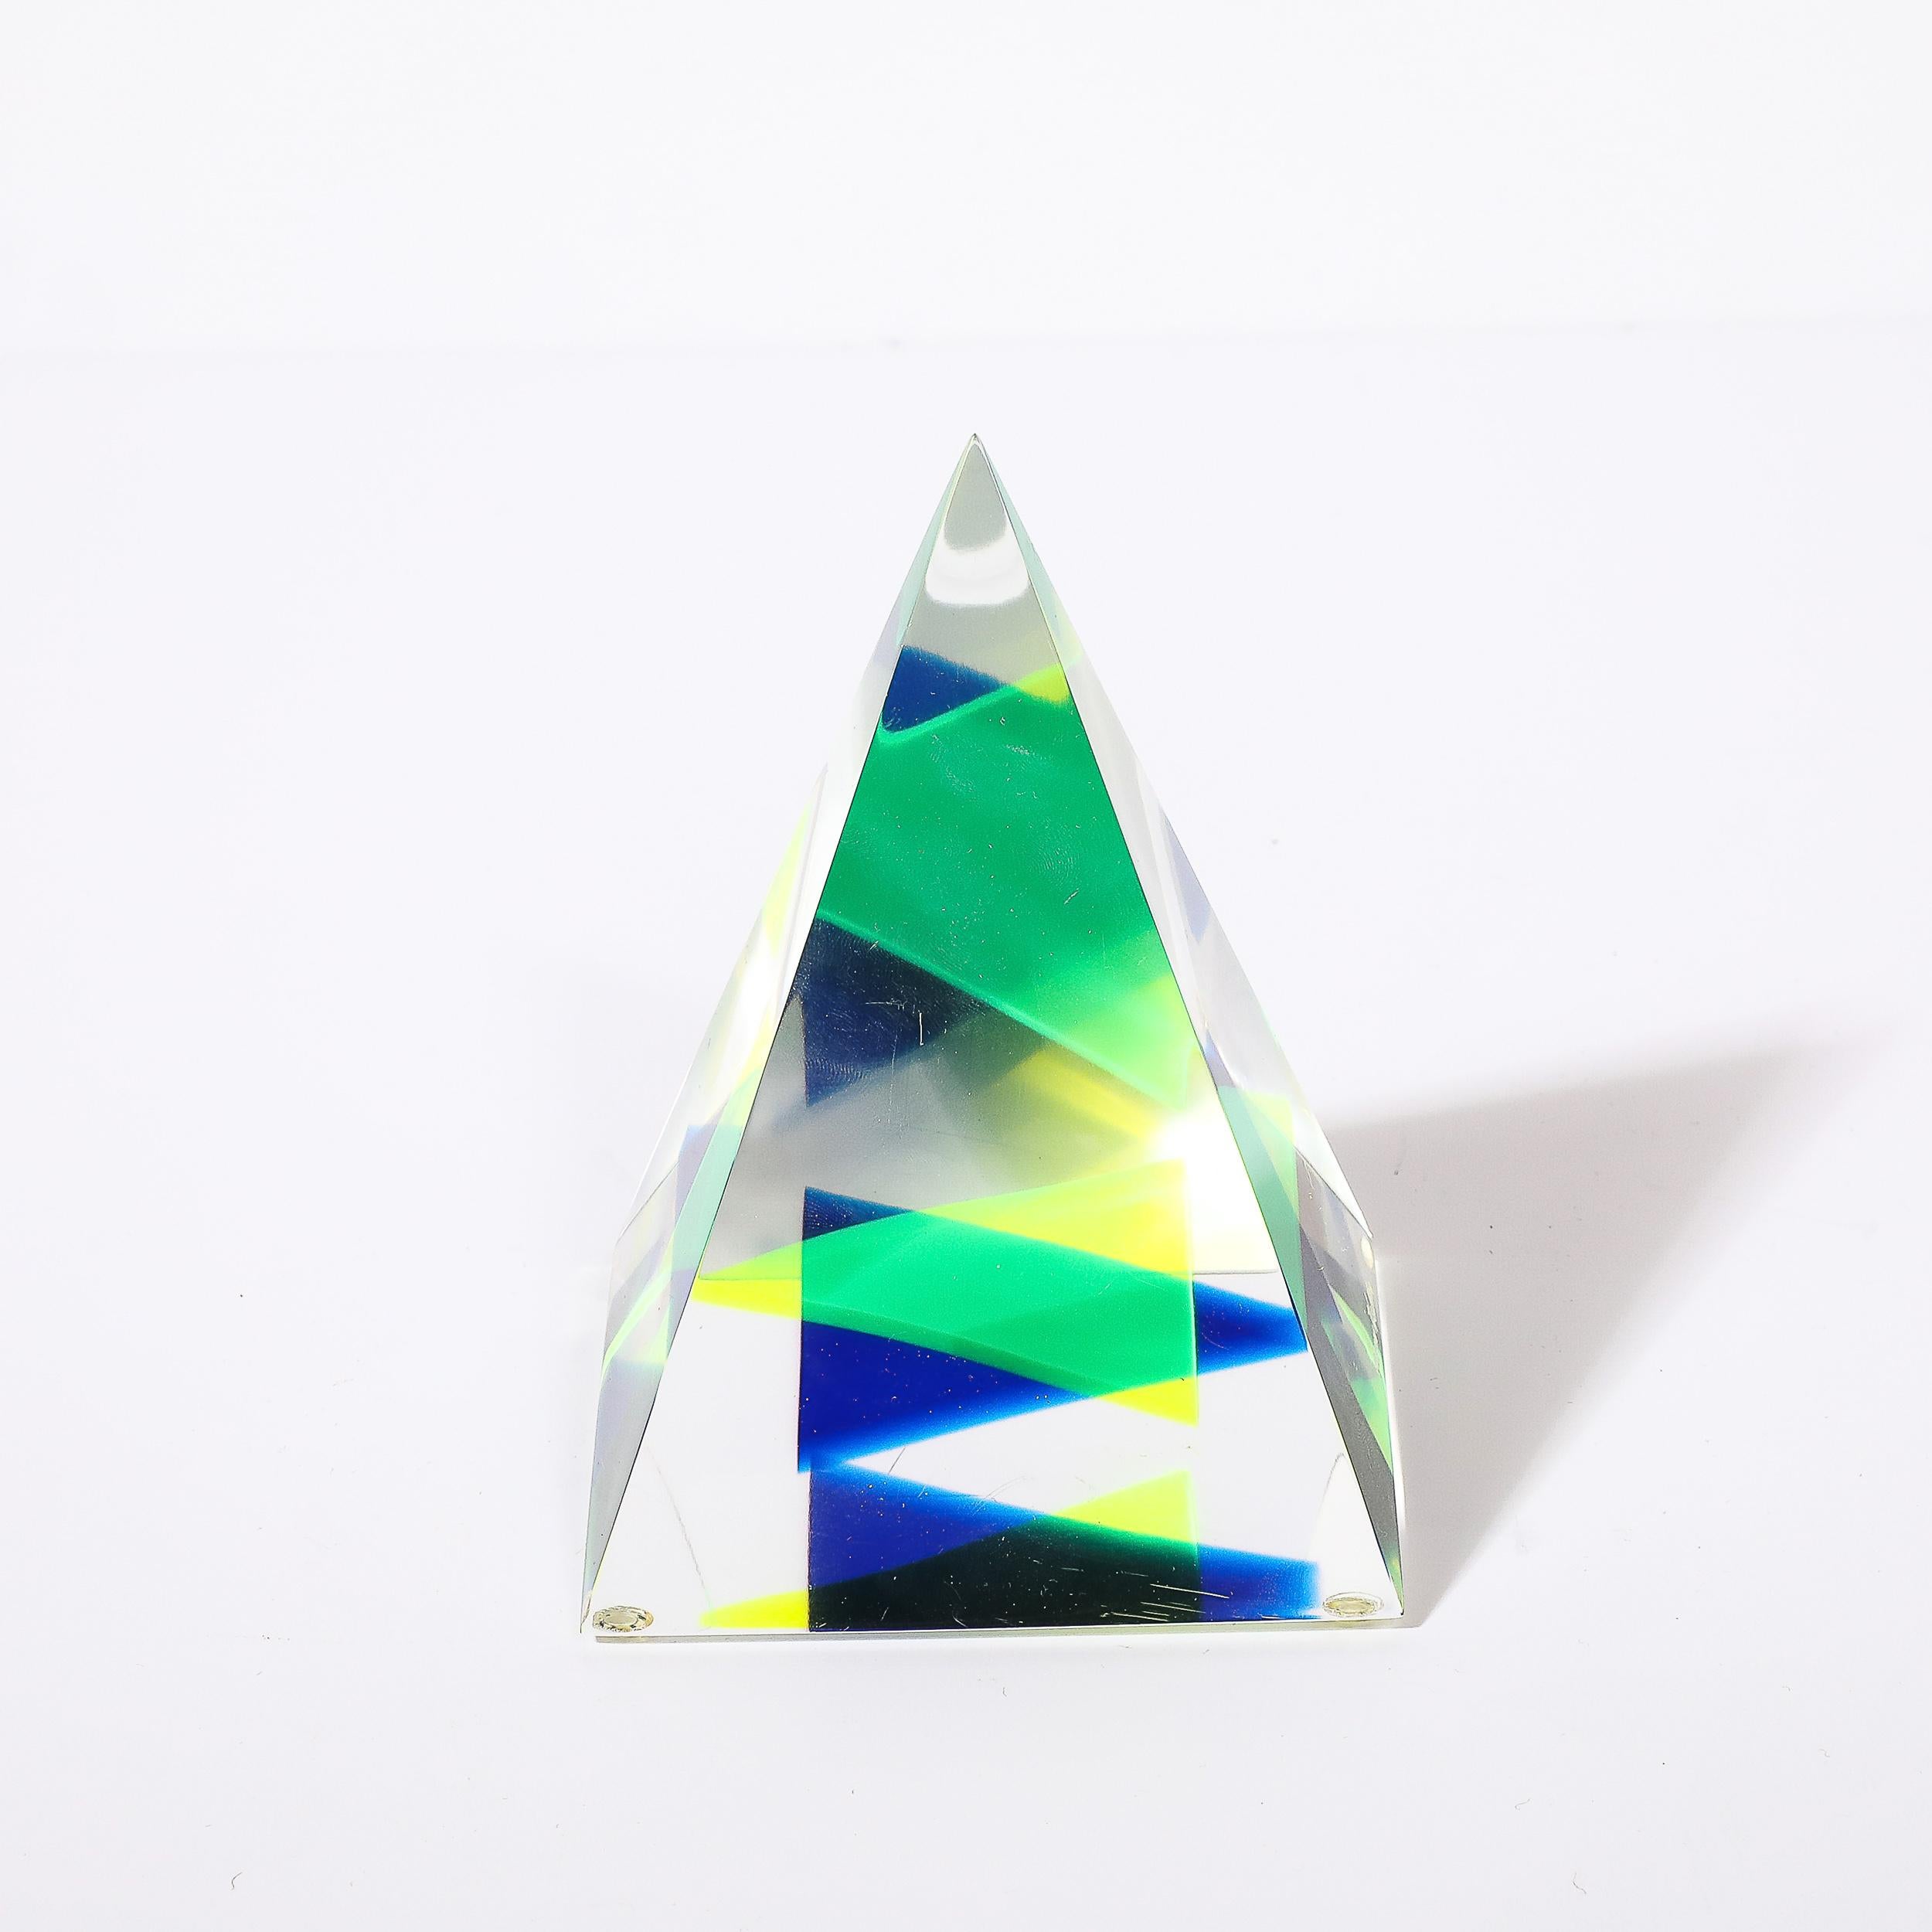 This unique and geometrically dynamic Mid-Century Modernist Pyramidal Lucite Sculpture is signed by Yaccov Heller and originates from the United States, Circa 1970. Features a pyramidal form with lovely yellow, turquoise, and ultramarine blue